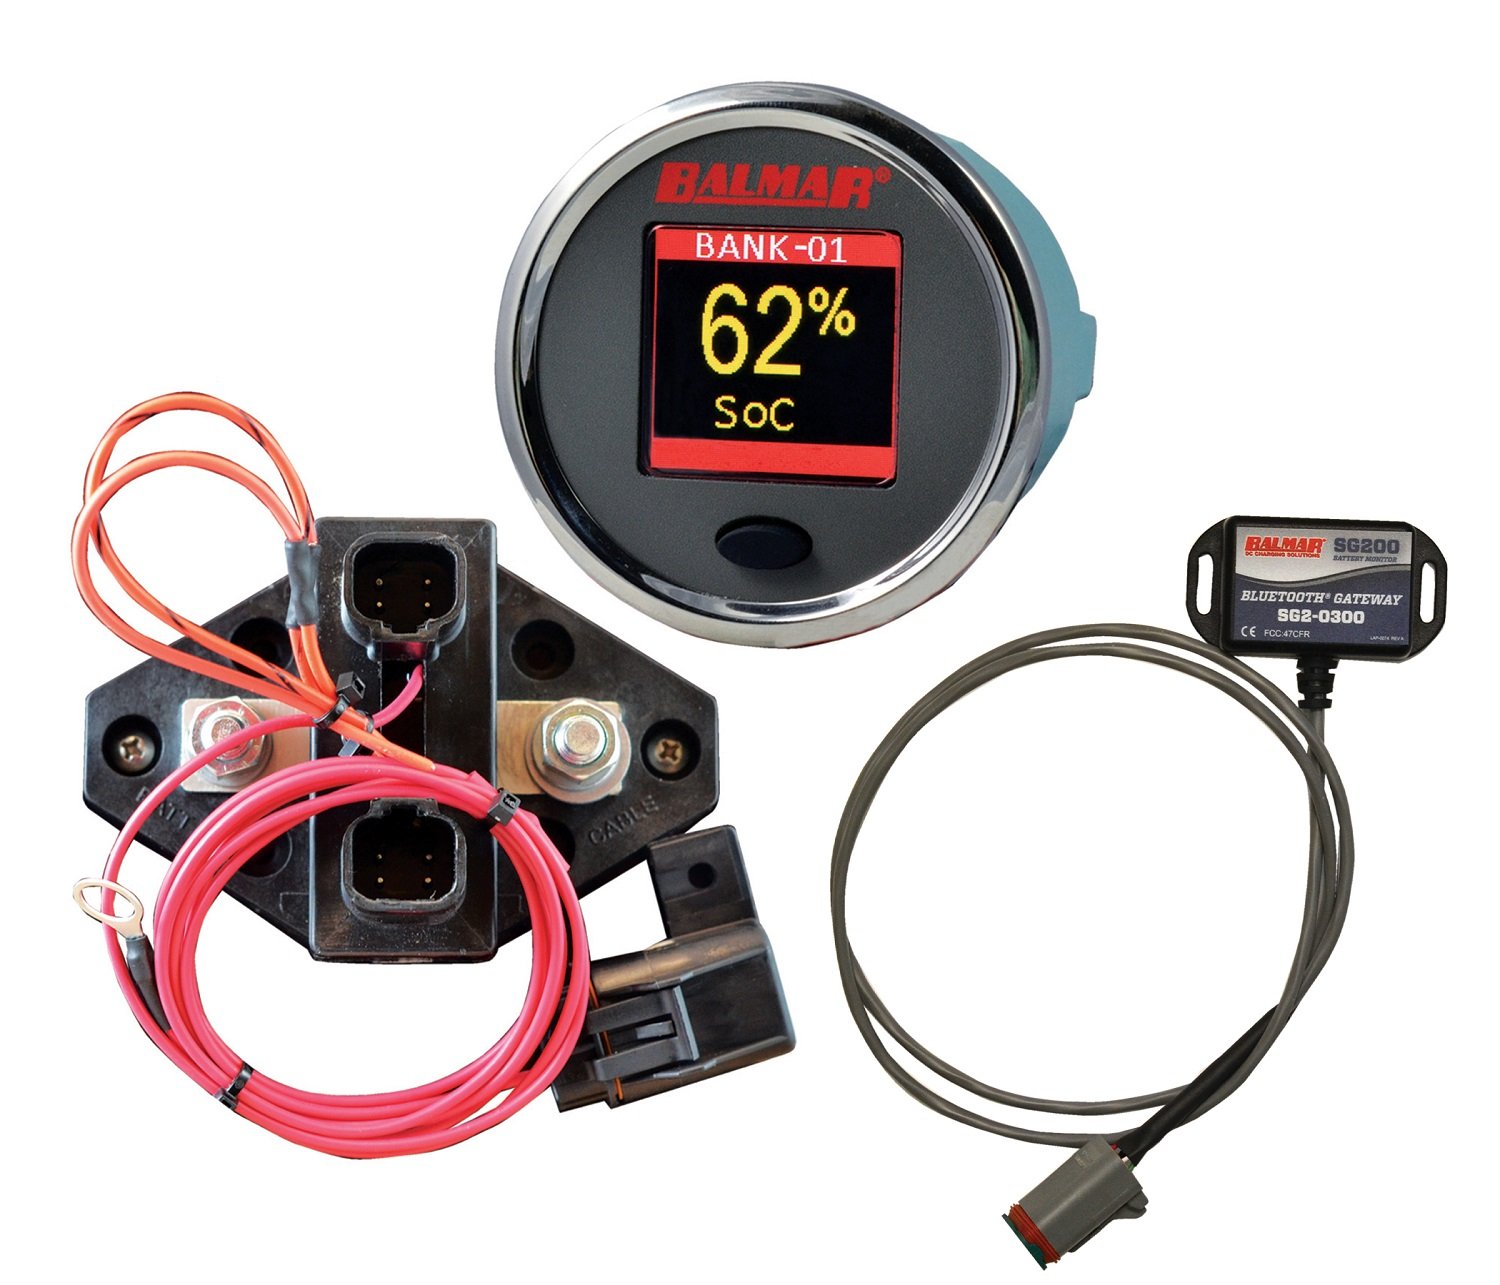 Balmar SG210 Battery Monitor with Bluetooth Gateway Questions & Answers